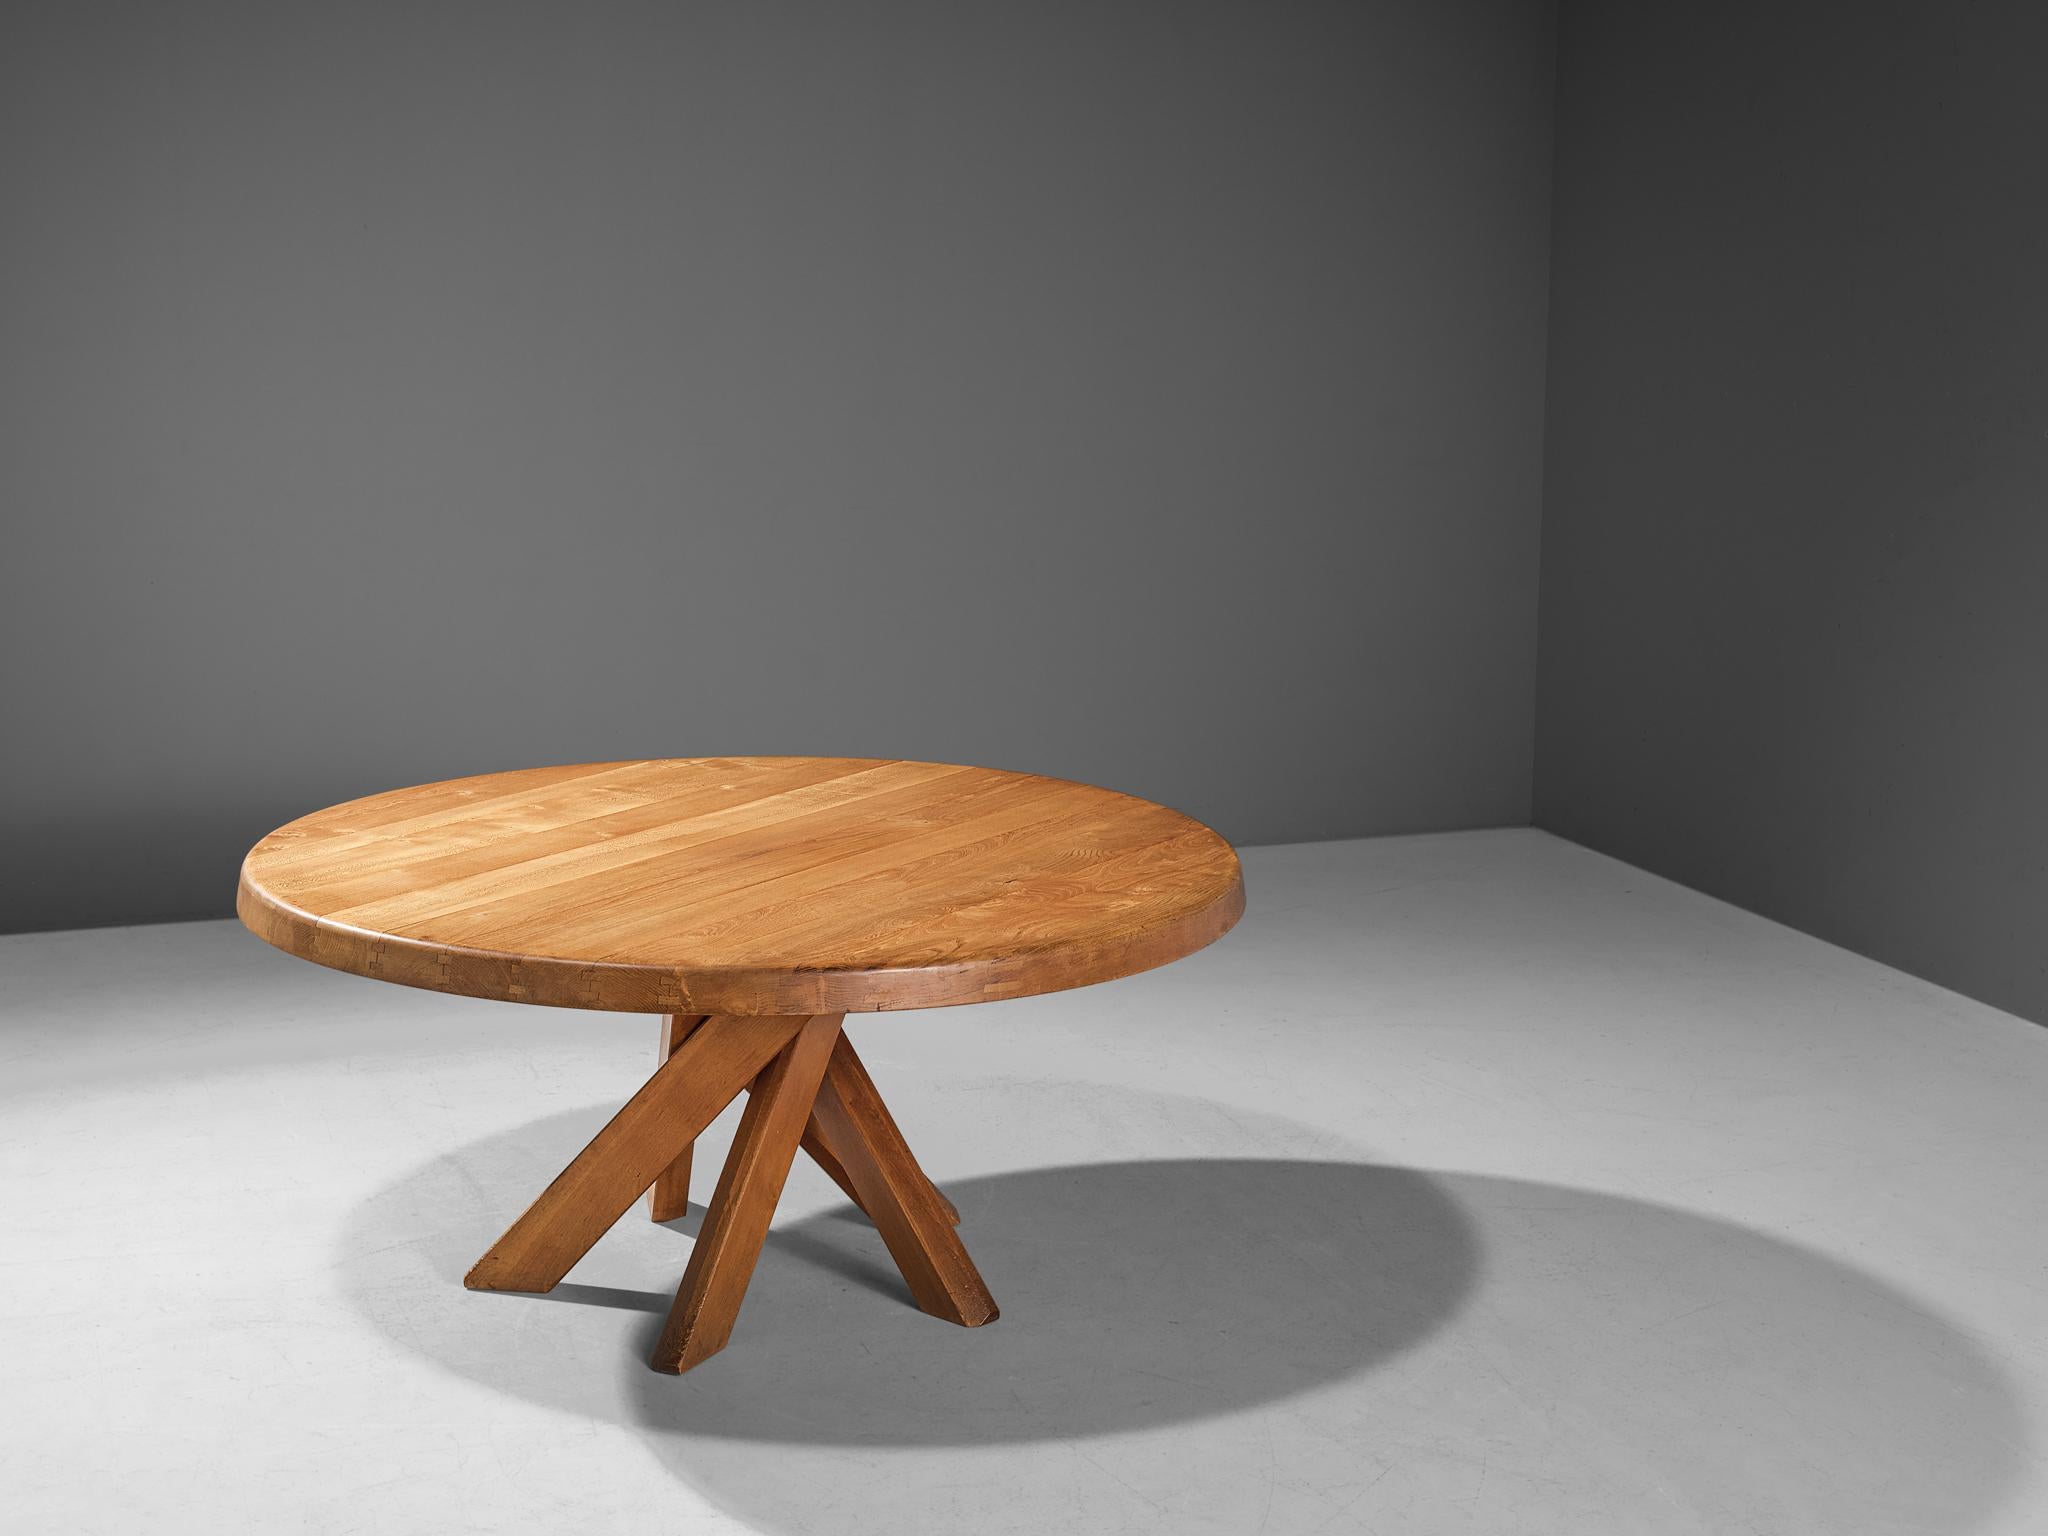 Pierre Chapo 'T21' Dining Table in Solid Elm, 1M60 diameter 1